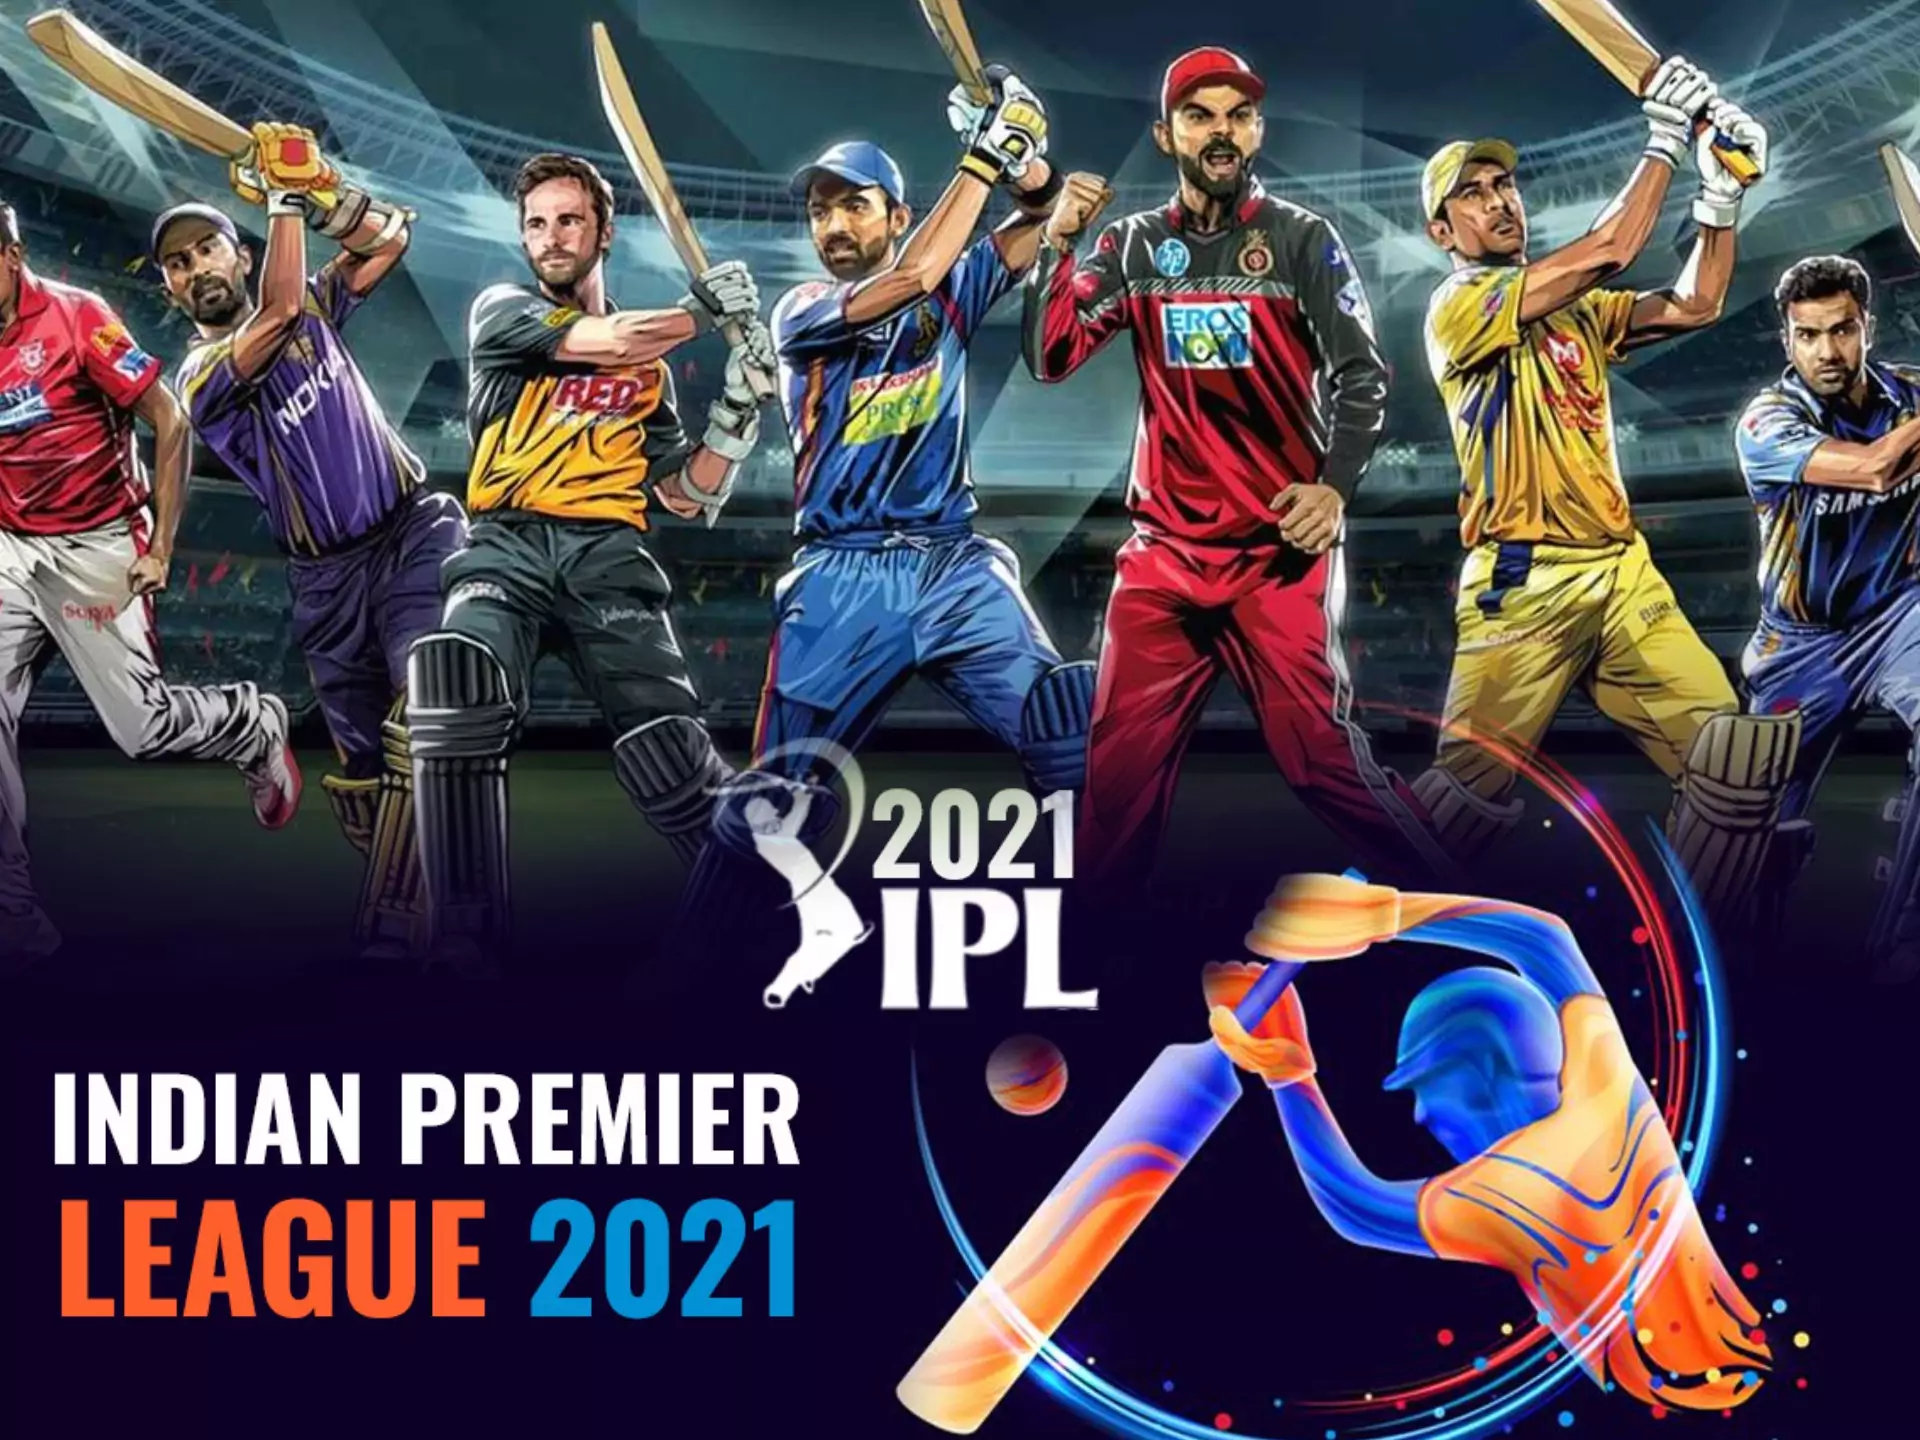 Watch IPL streamings at sportsbooks' sites and place profitable bets.